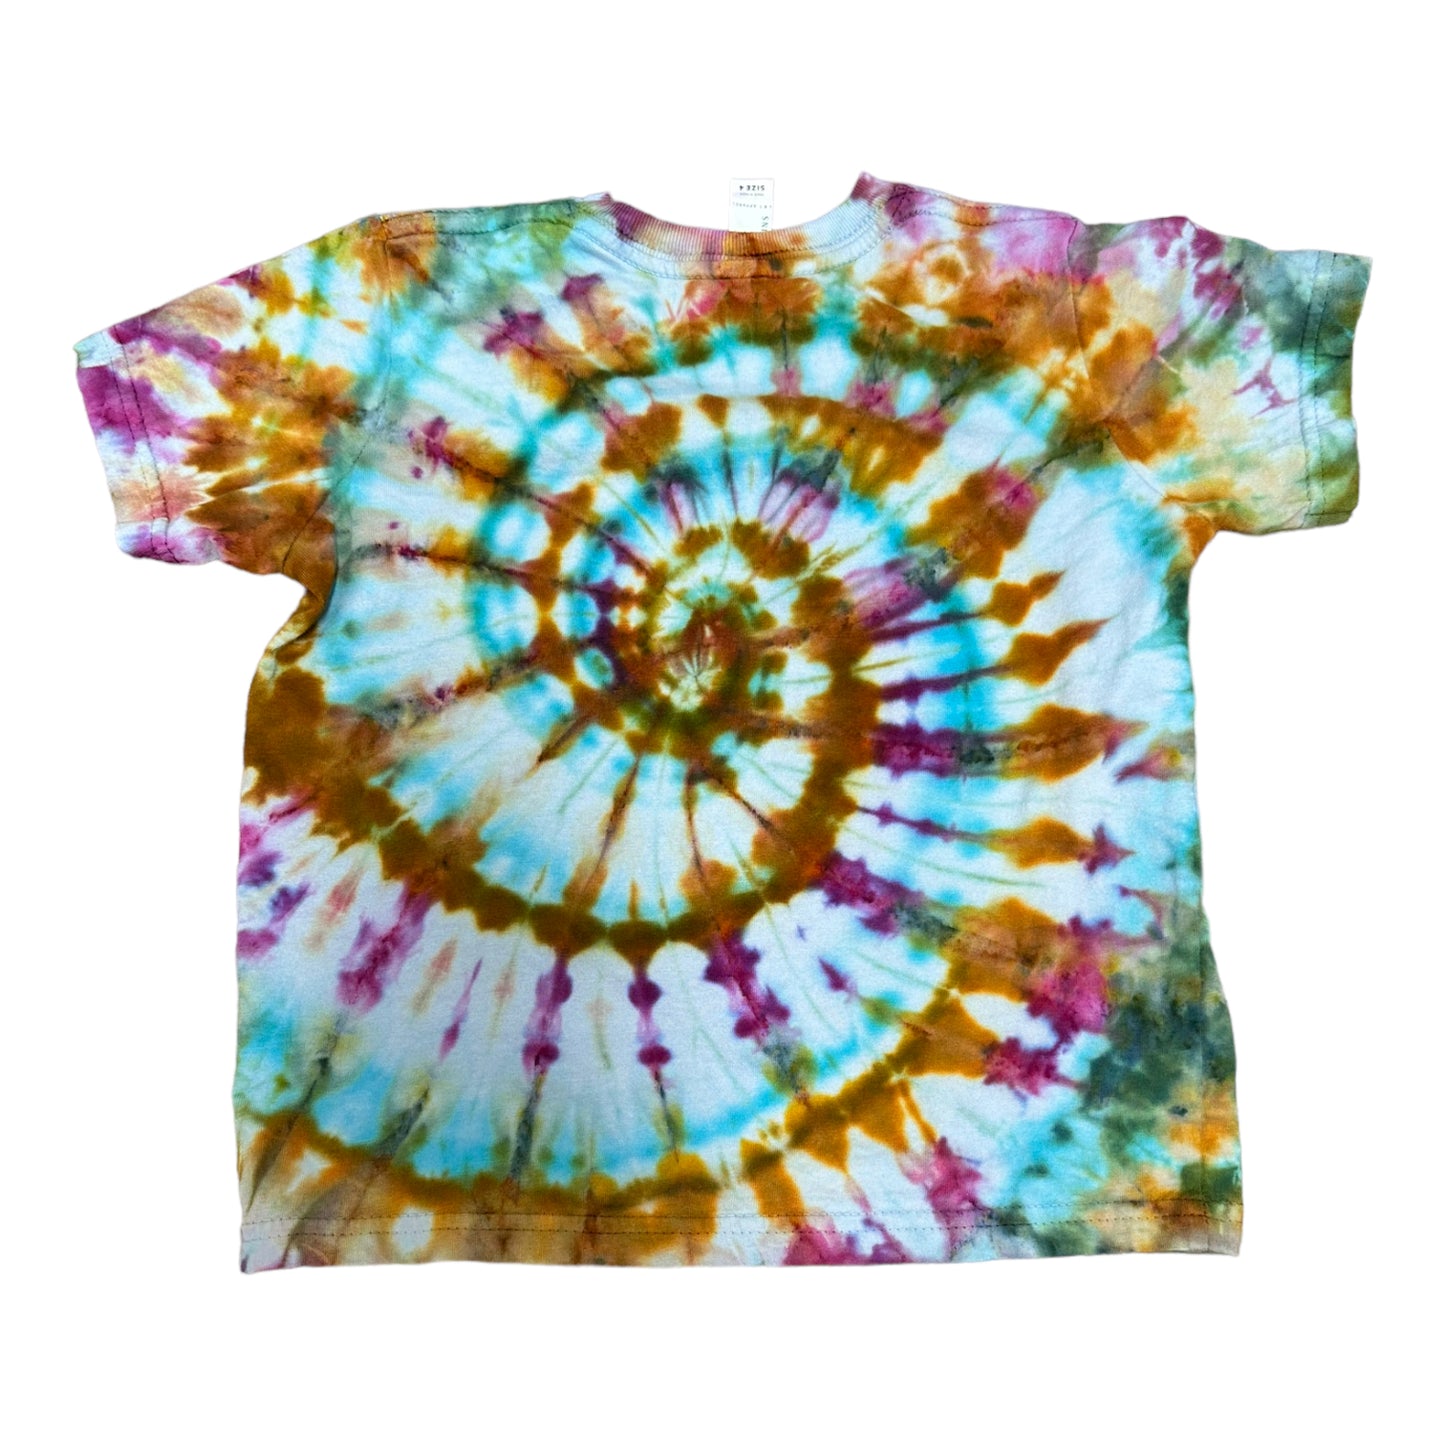 Toddler 4T Green Yellow Purple and Blue Spiral Ice Dye Tie Dye Shirt